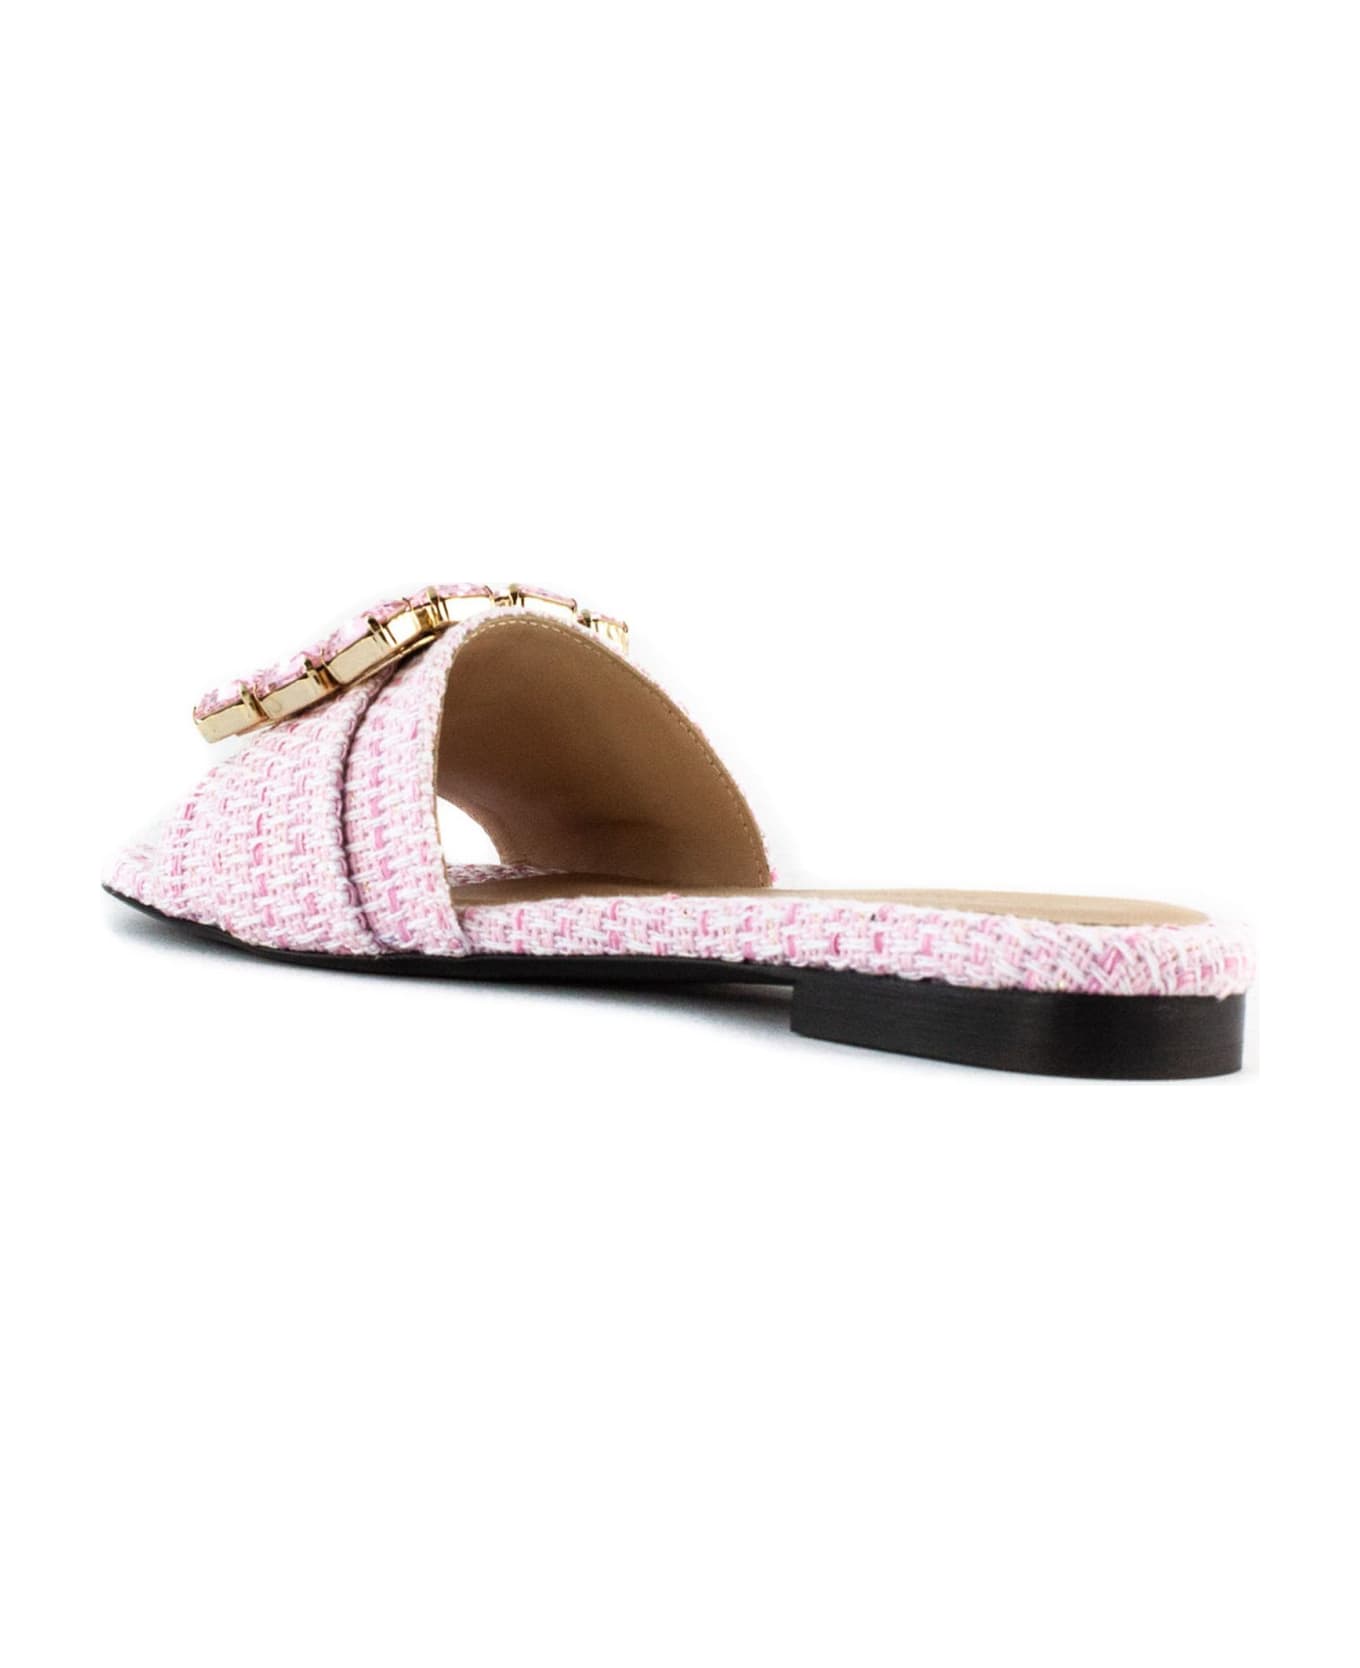 Roberto Festa White And Pink Boucle Fade Sandal - Pink